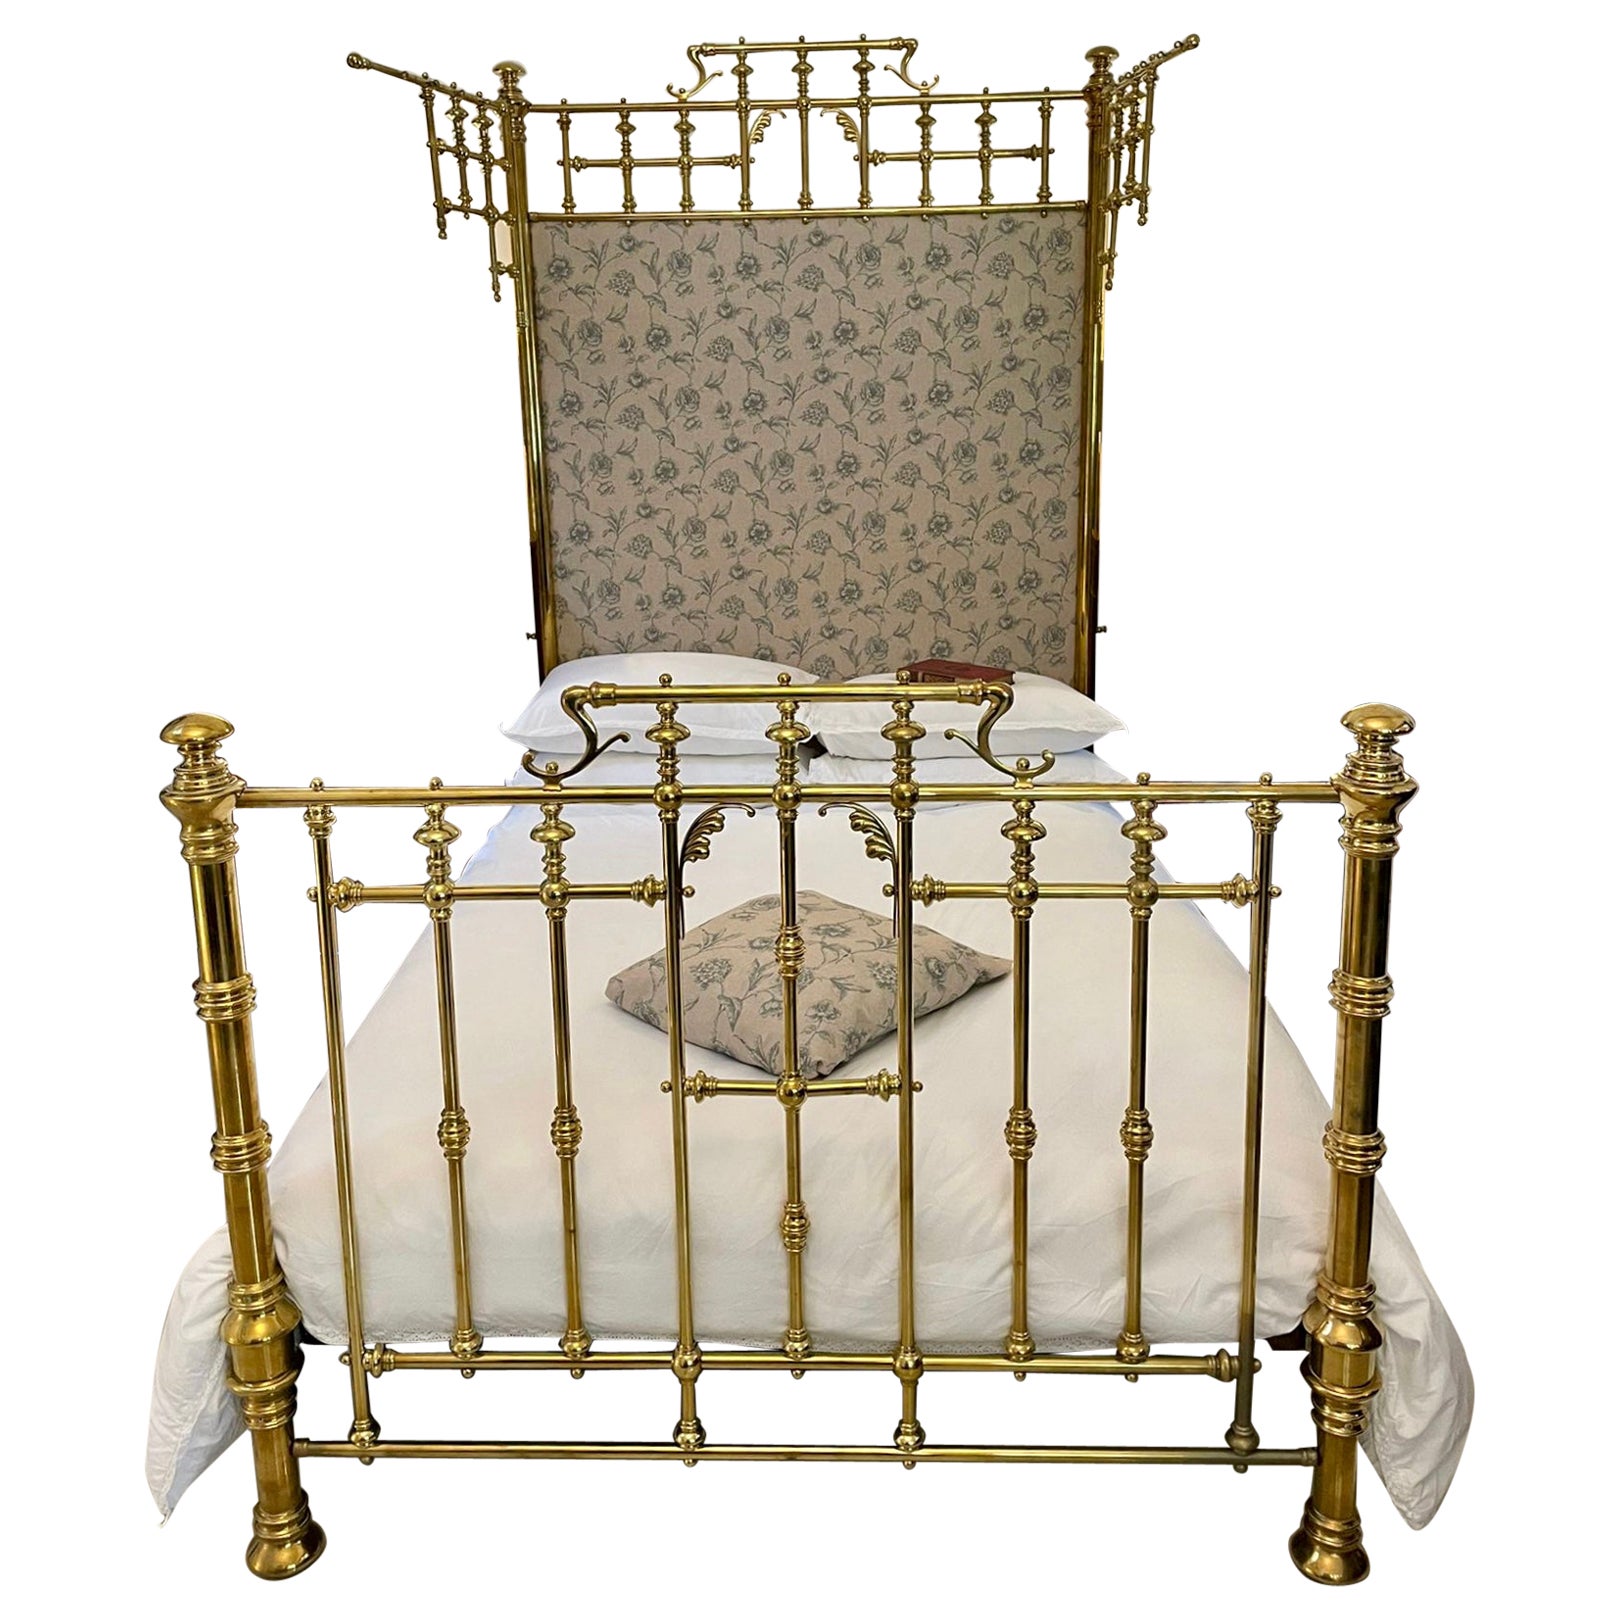 Magnificent Exhibition Quality Antique Gilded Solid Brass Half Tester Double Bed For Sale